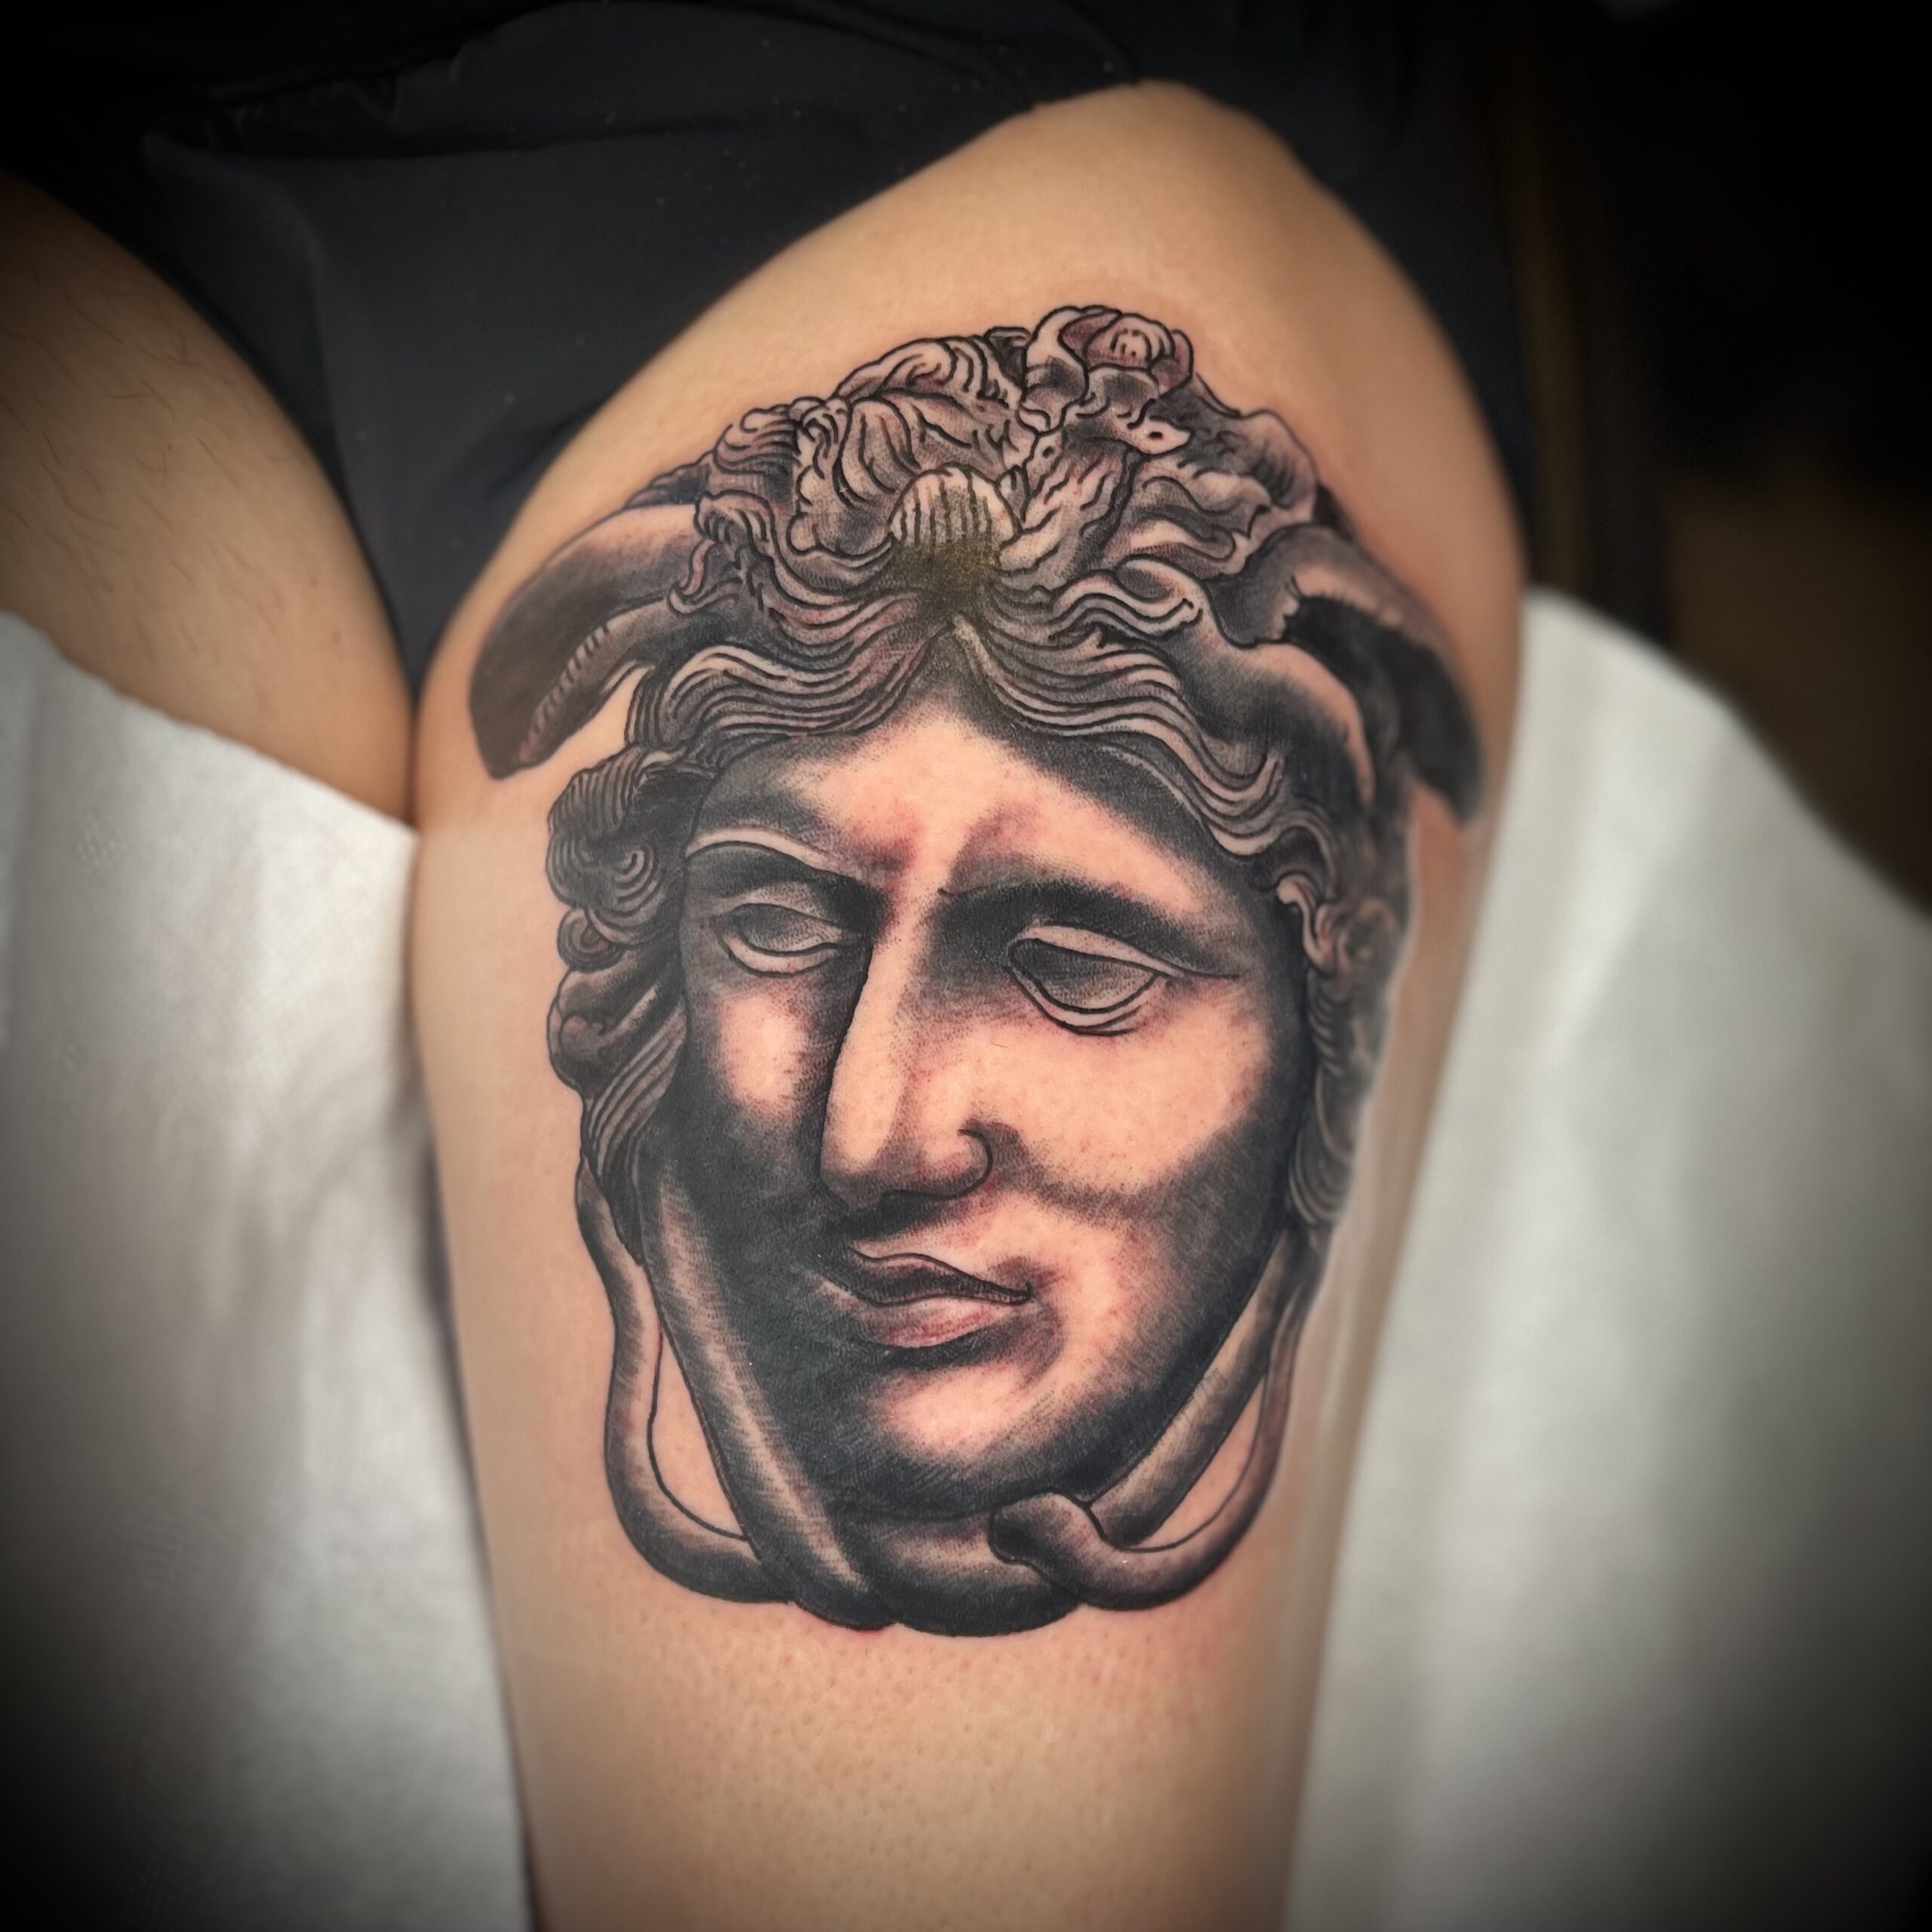 Face tattoo from top tattoo shop in Texas